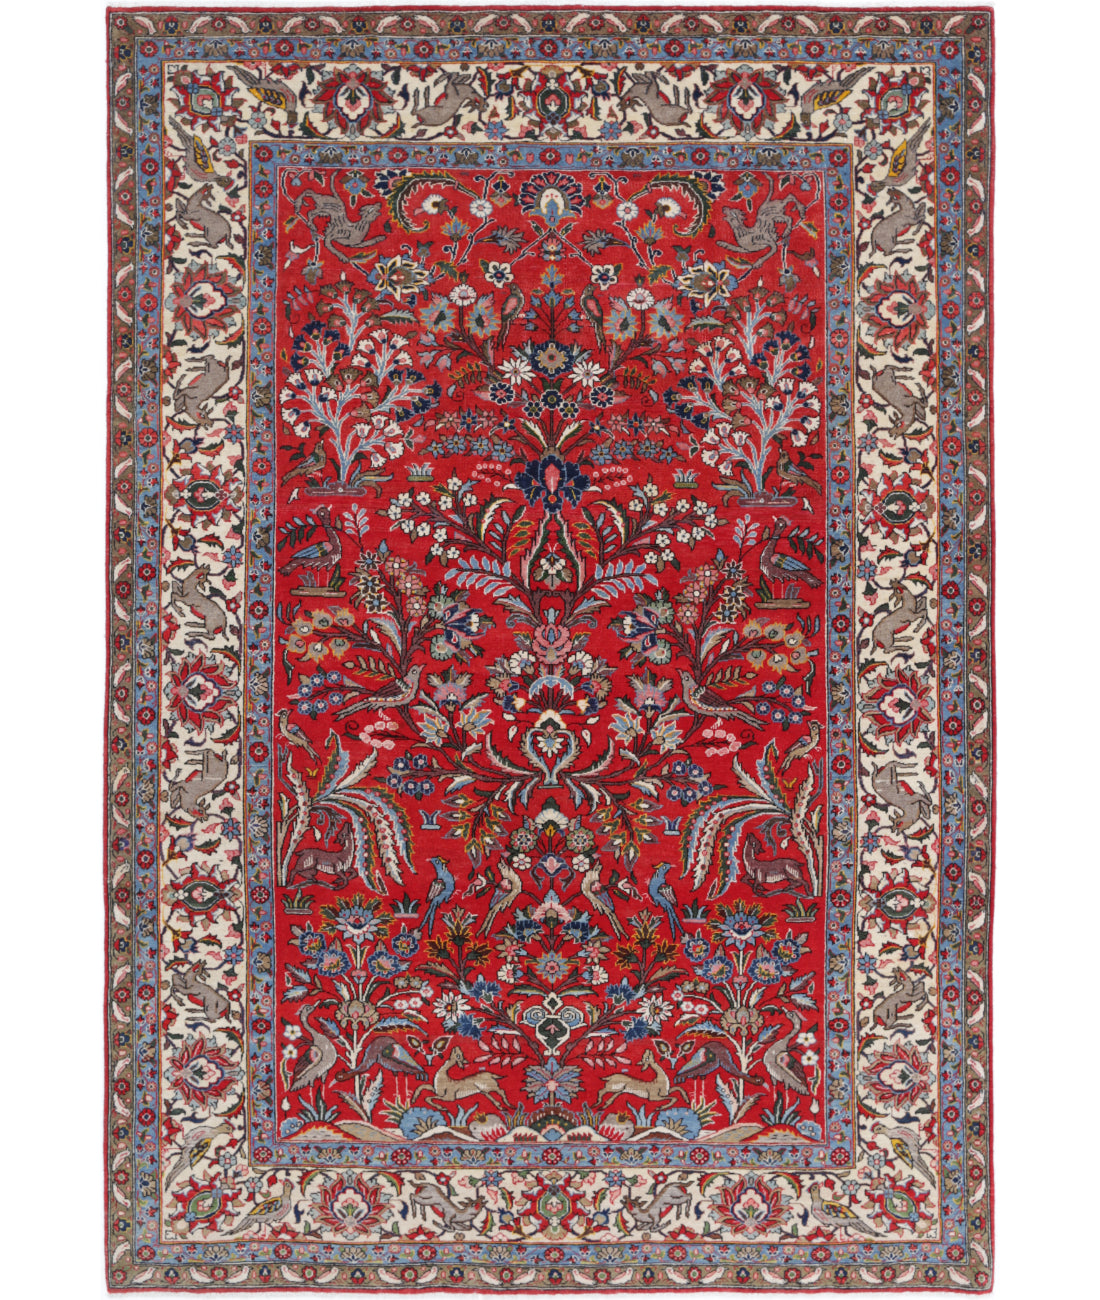 Hand Knotted Antique Persian Sarouk Wool Rug - 6'3'' x 9'3'' 6'3'' x 9'3'' (188 X 278) / Red / Ivory